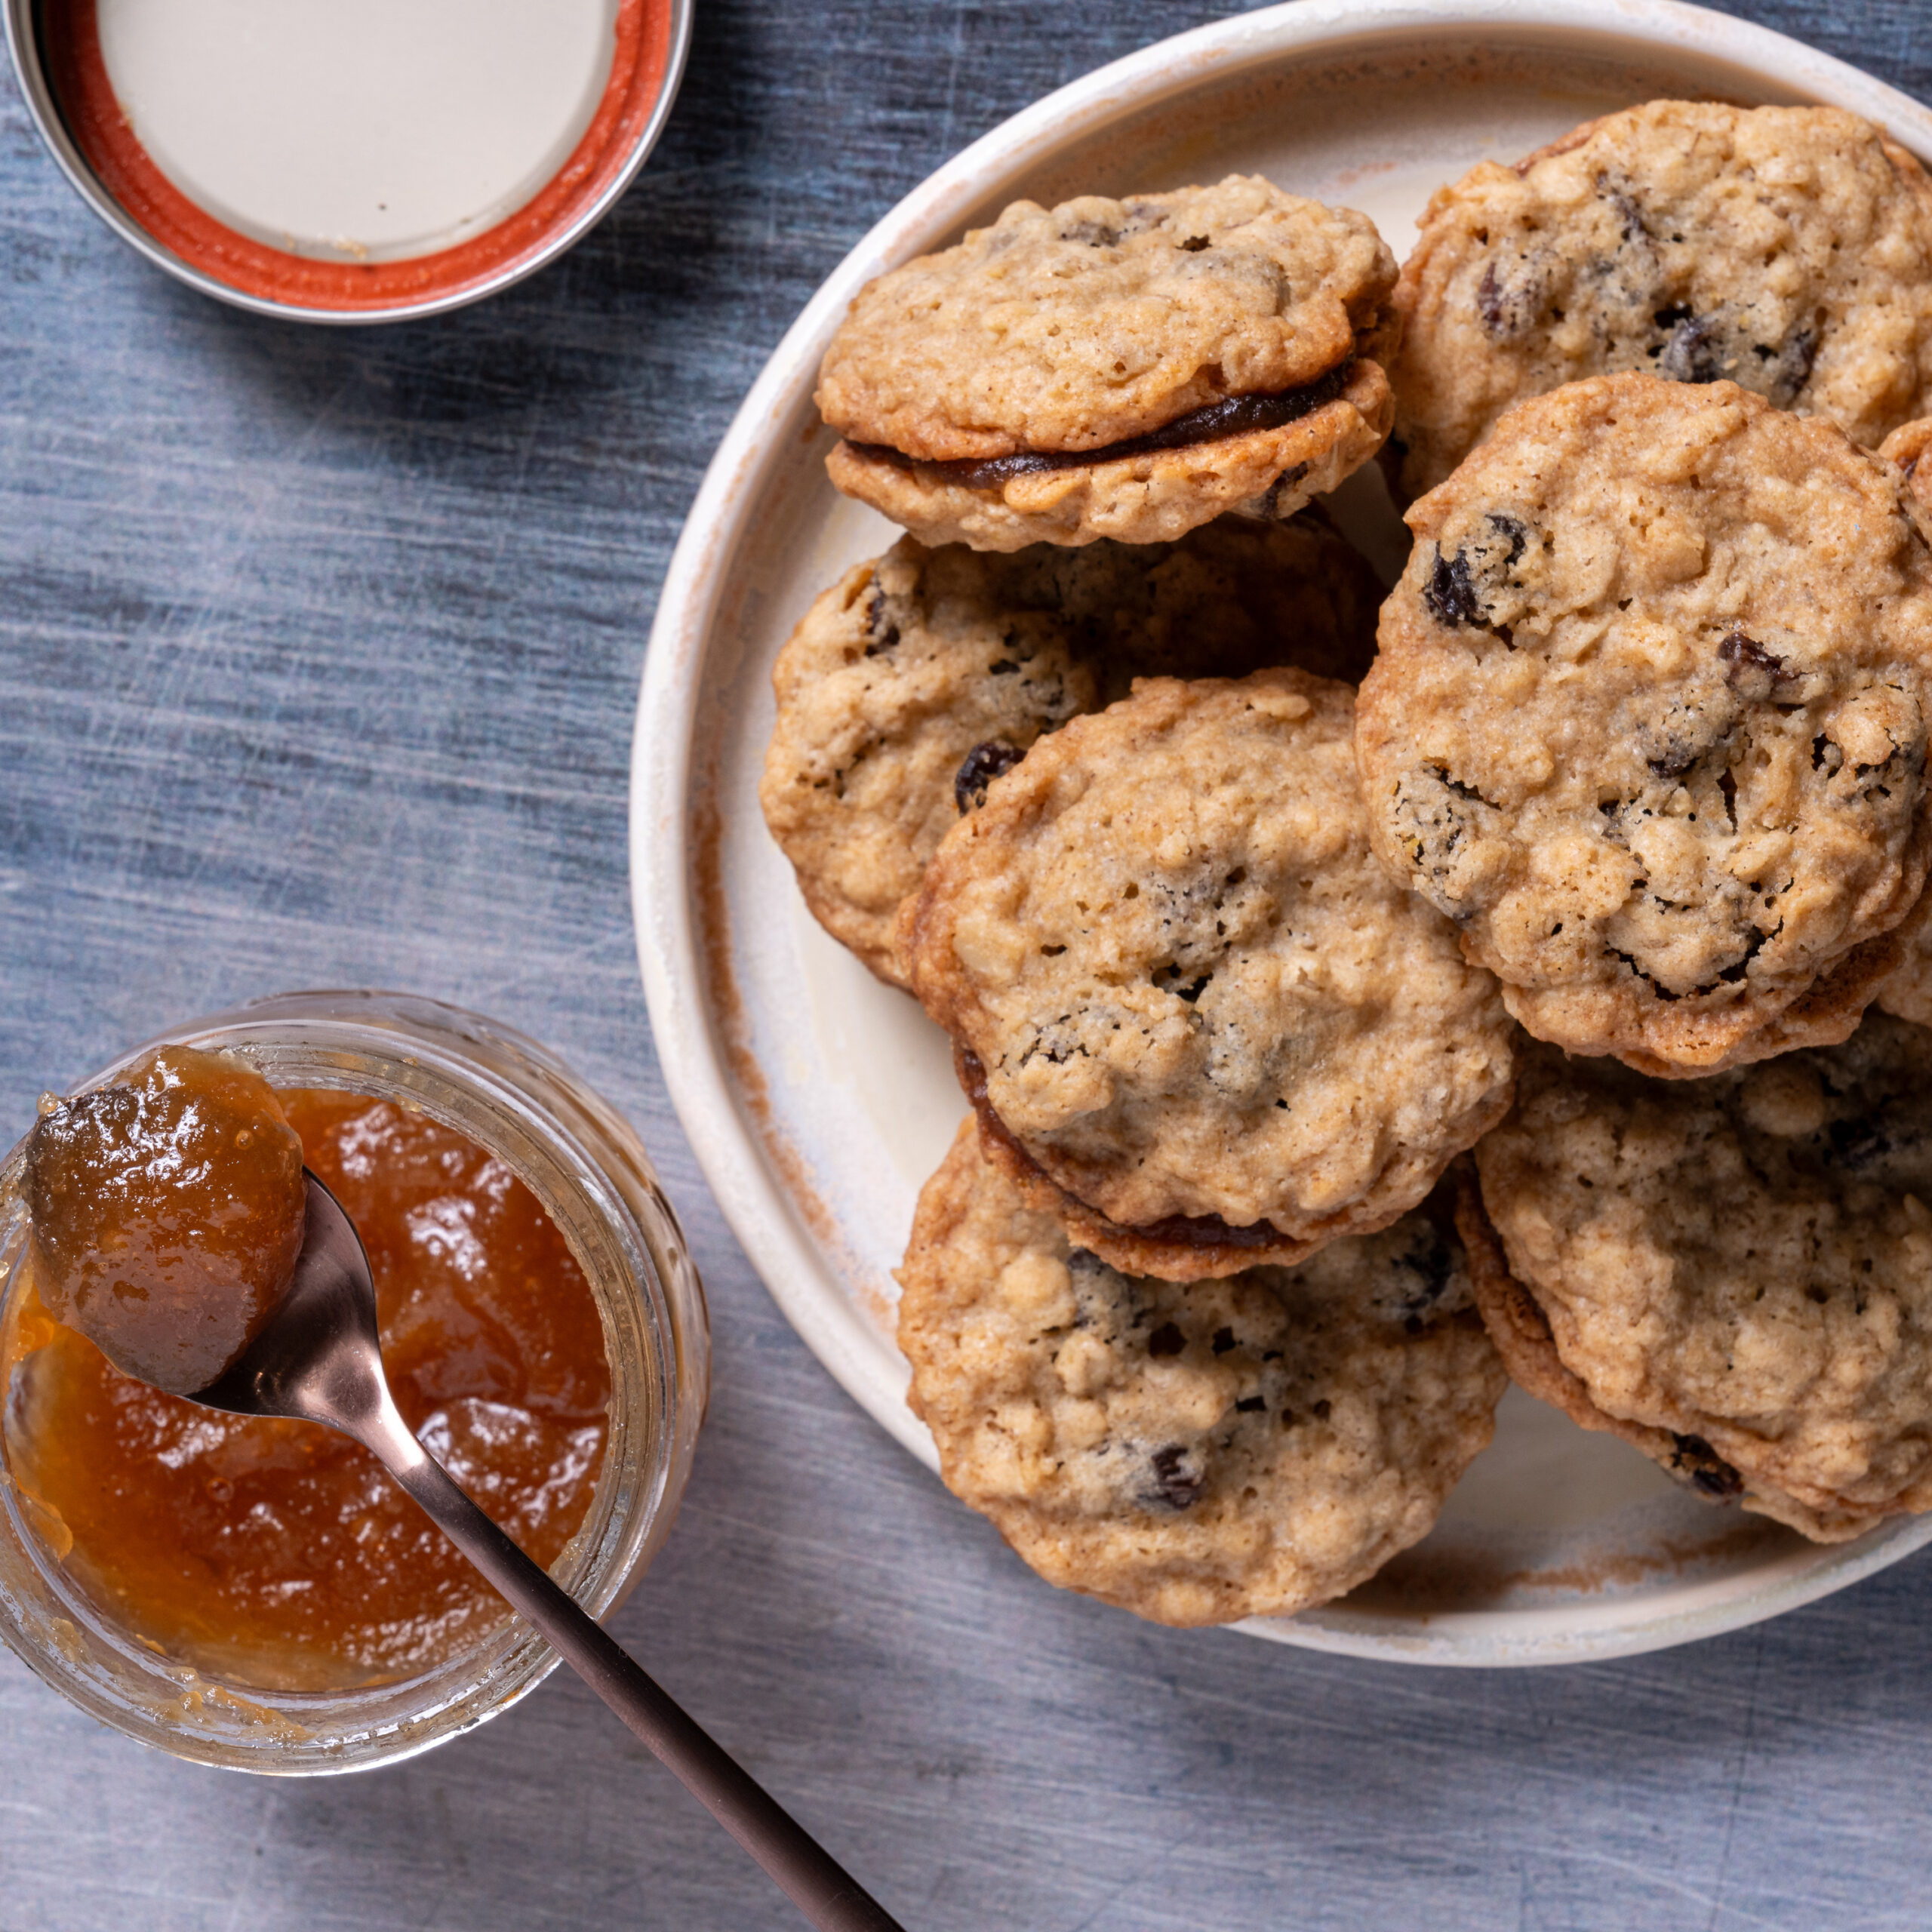 Oatmeal-Raisin Sandwich Cookies with Apple Butter - The Culinary Cellar